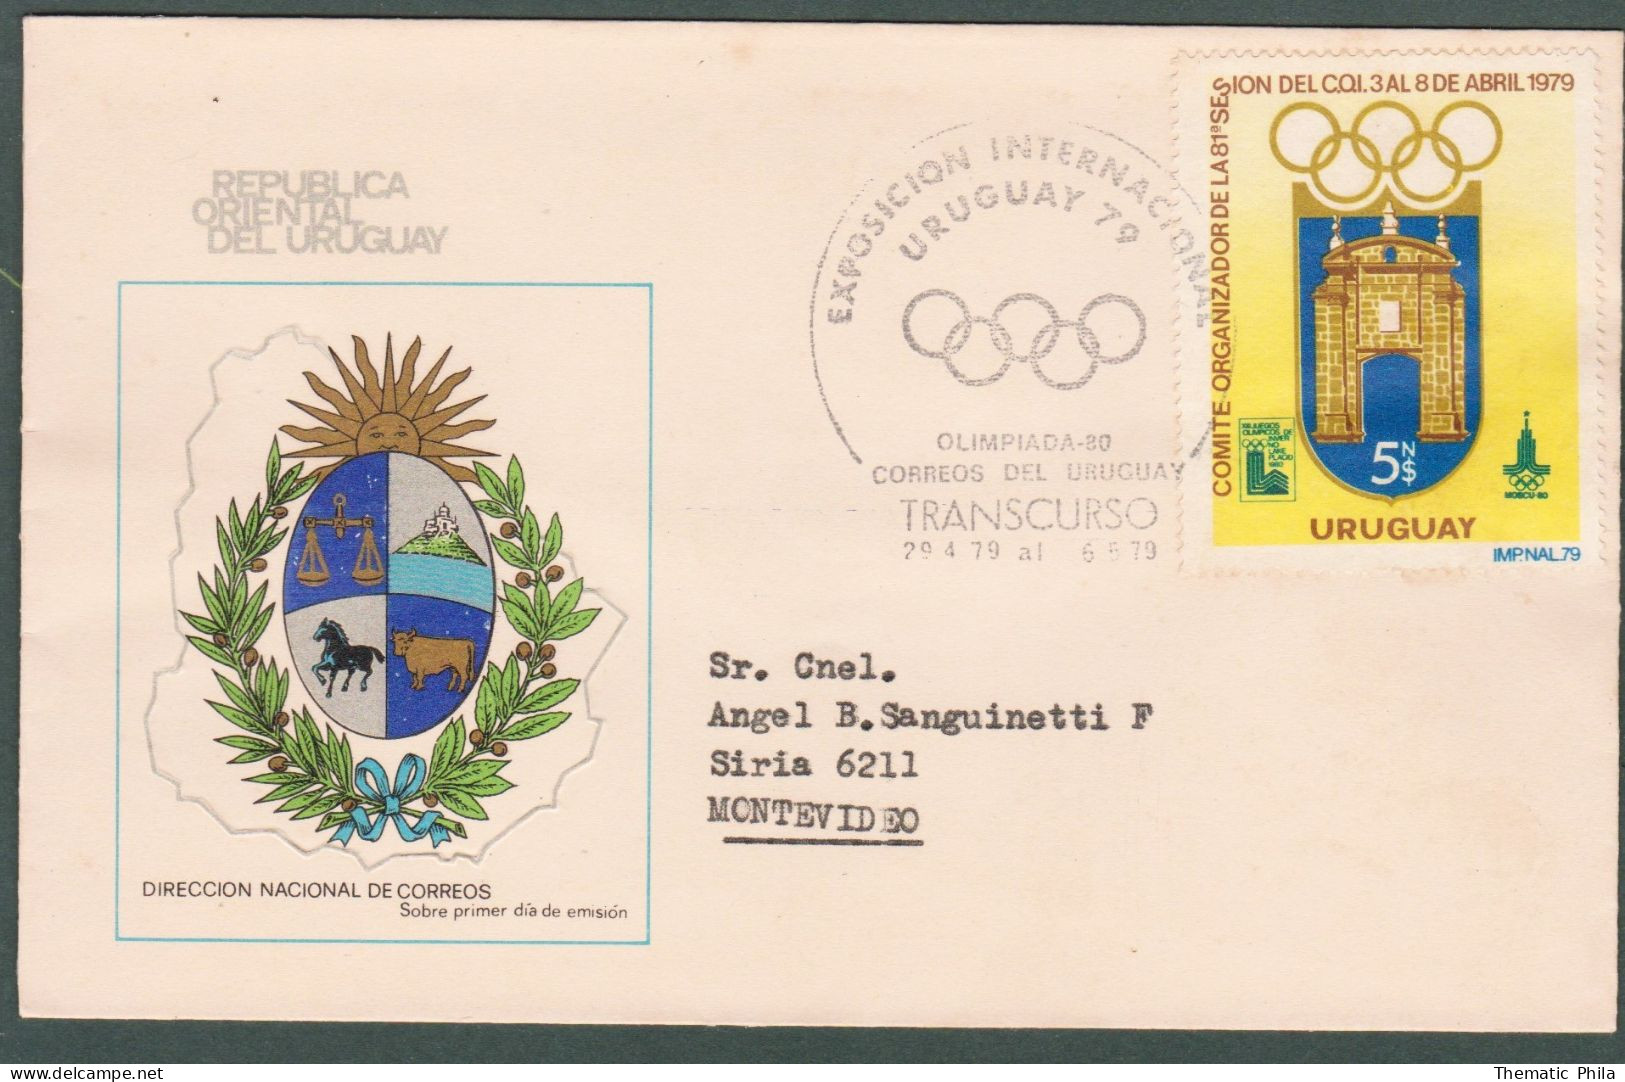 1979 URUGUAY Special Postmark Transcurso Expo International Olympic Games -Comité International Olympique Moscu 80 - Hiver 1980: Lake Placid